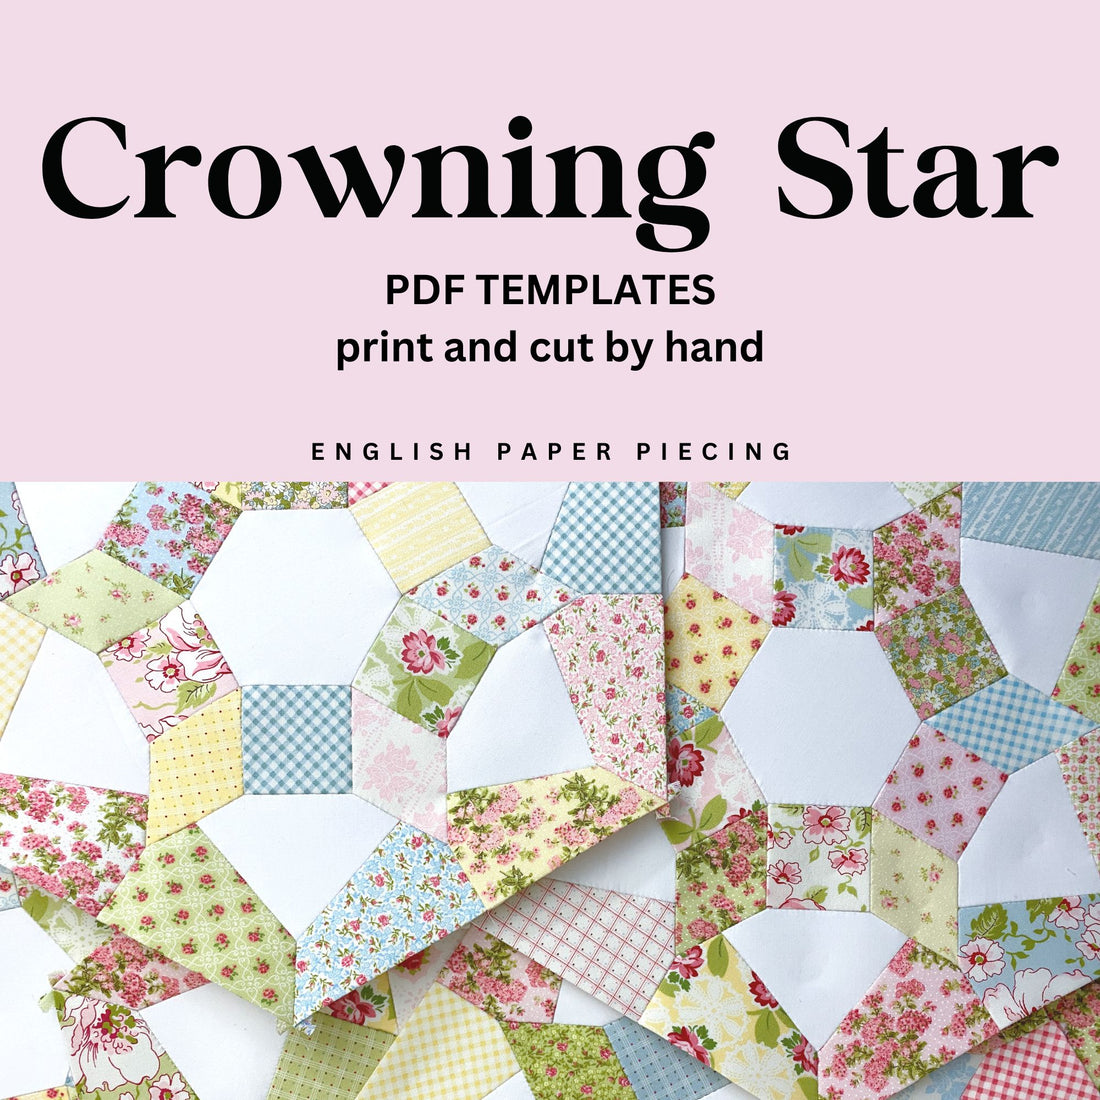 Crowning Star Quilt PDF templates